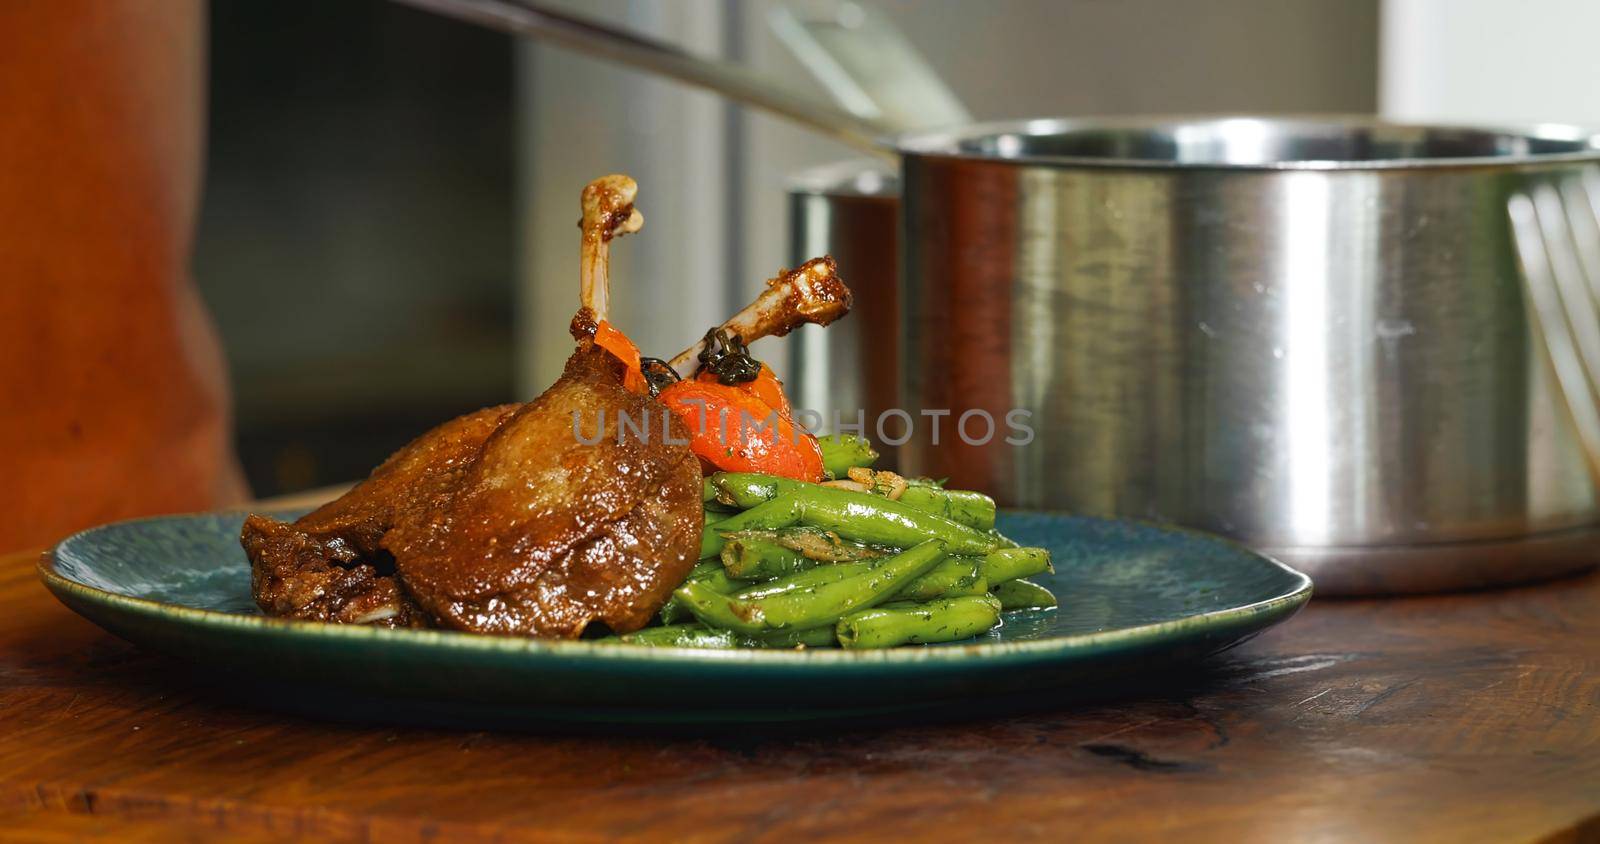 Appetizing Duck Meal Fried Tomato Decorated Close Up Details of Cooking. by RecCameraStock